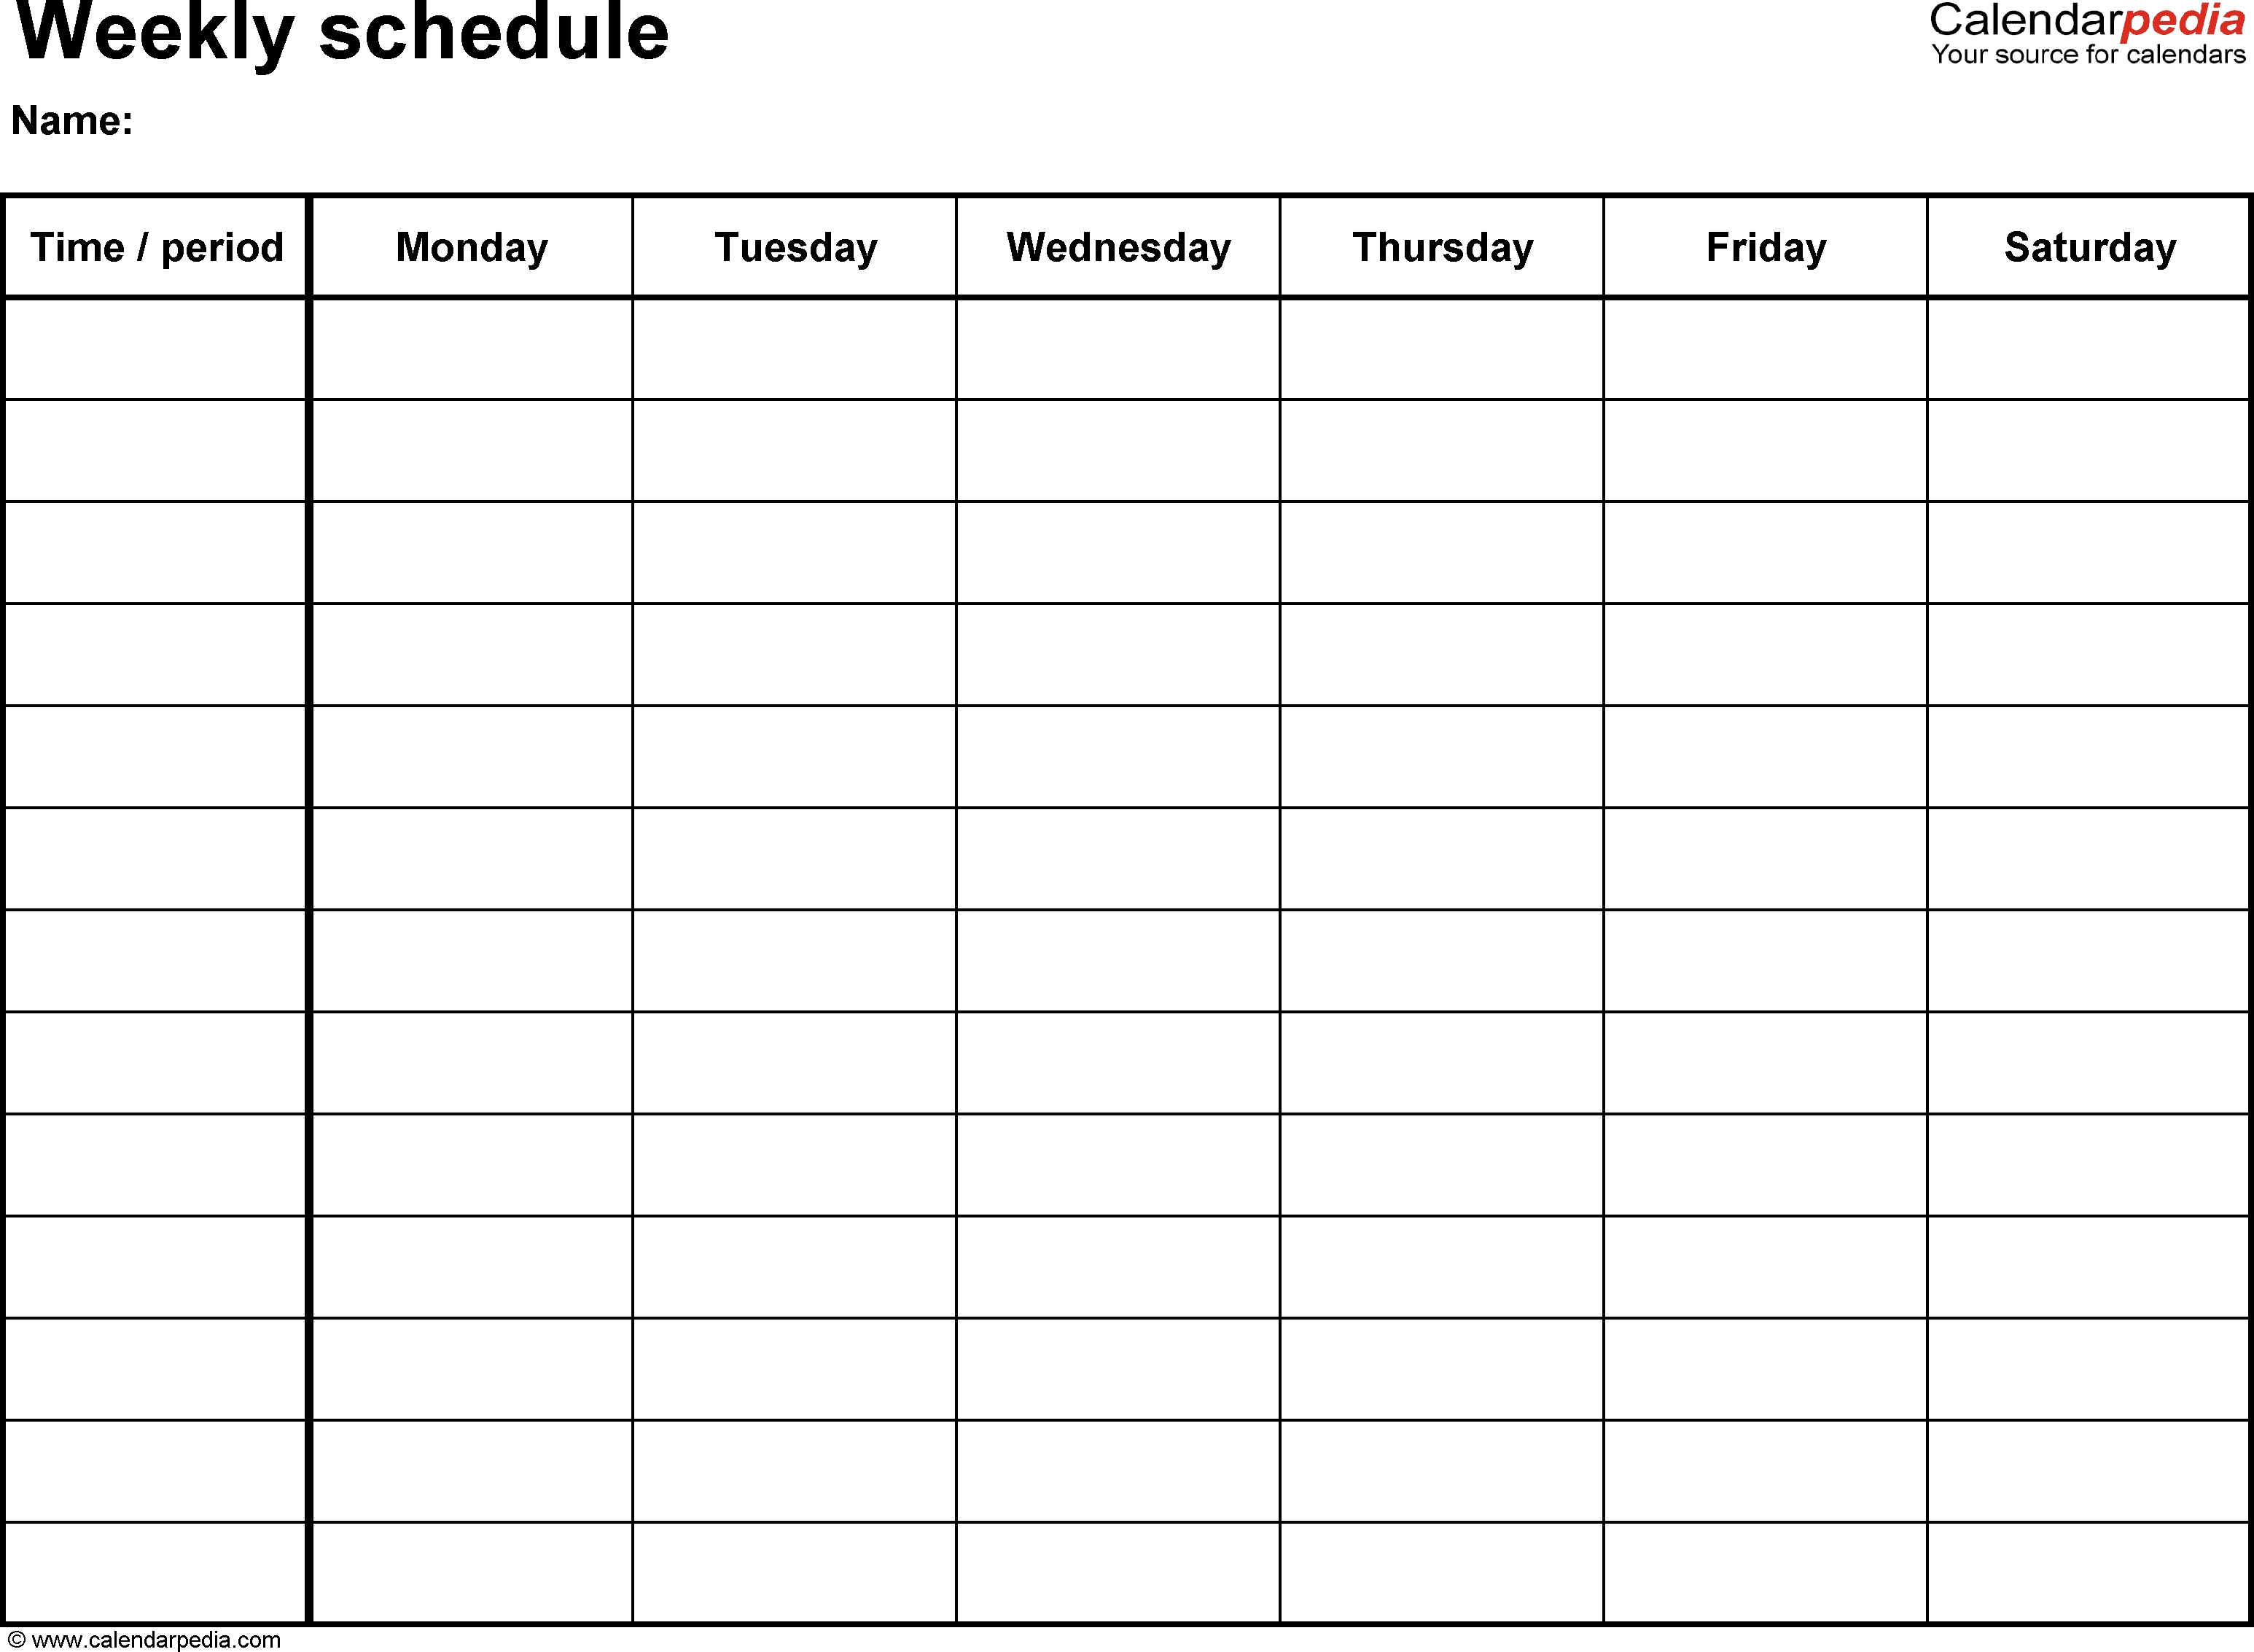 Free Weekly Schedule Templates For Pdf - 18 Templates-Calendar No Dates Template